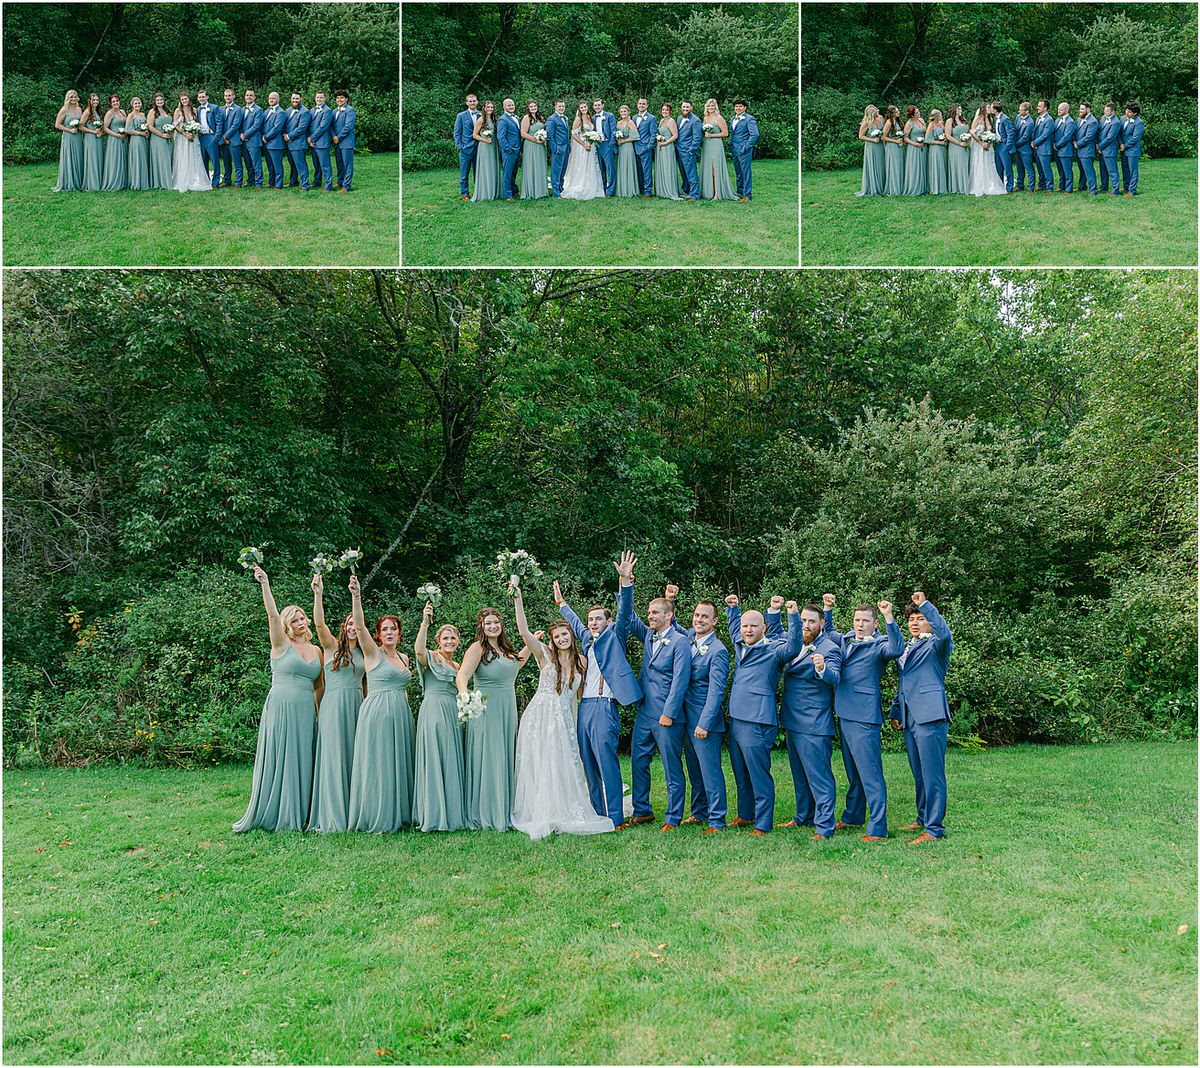 Bride and groom celebrate with family and friends at Harmony Hill Farm